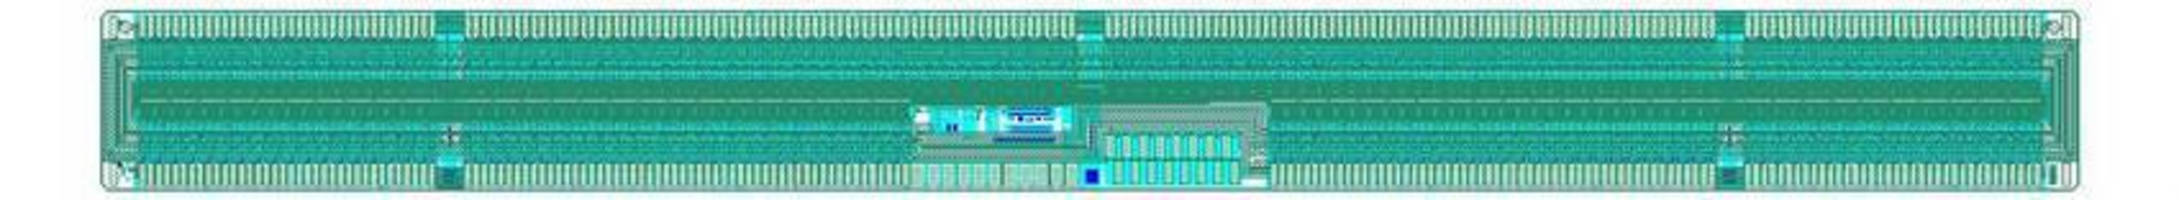 EPD Driver IC features 400 outputs rated for